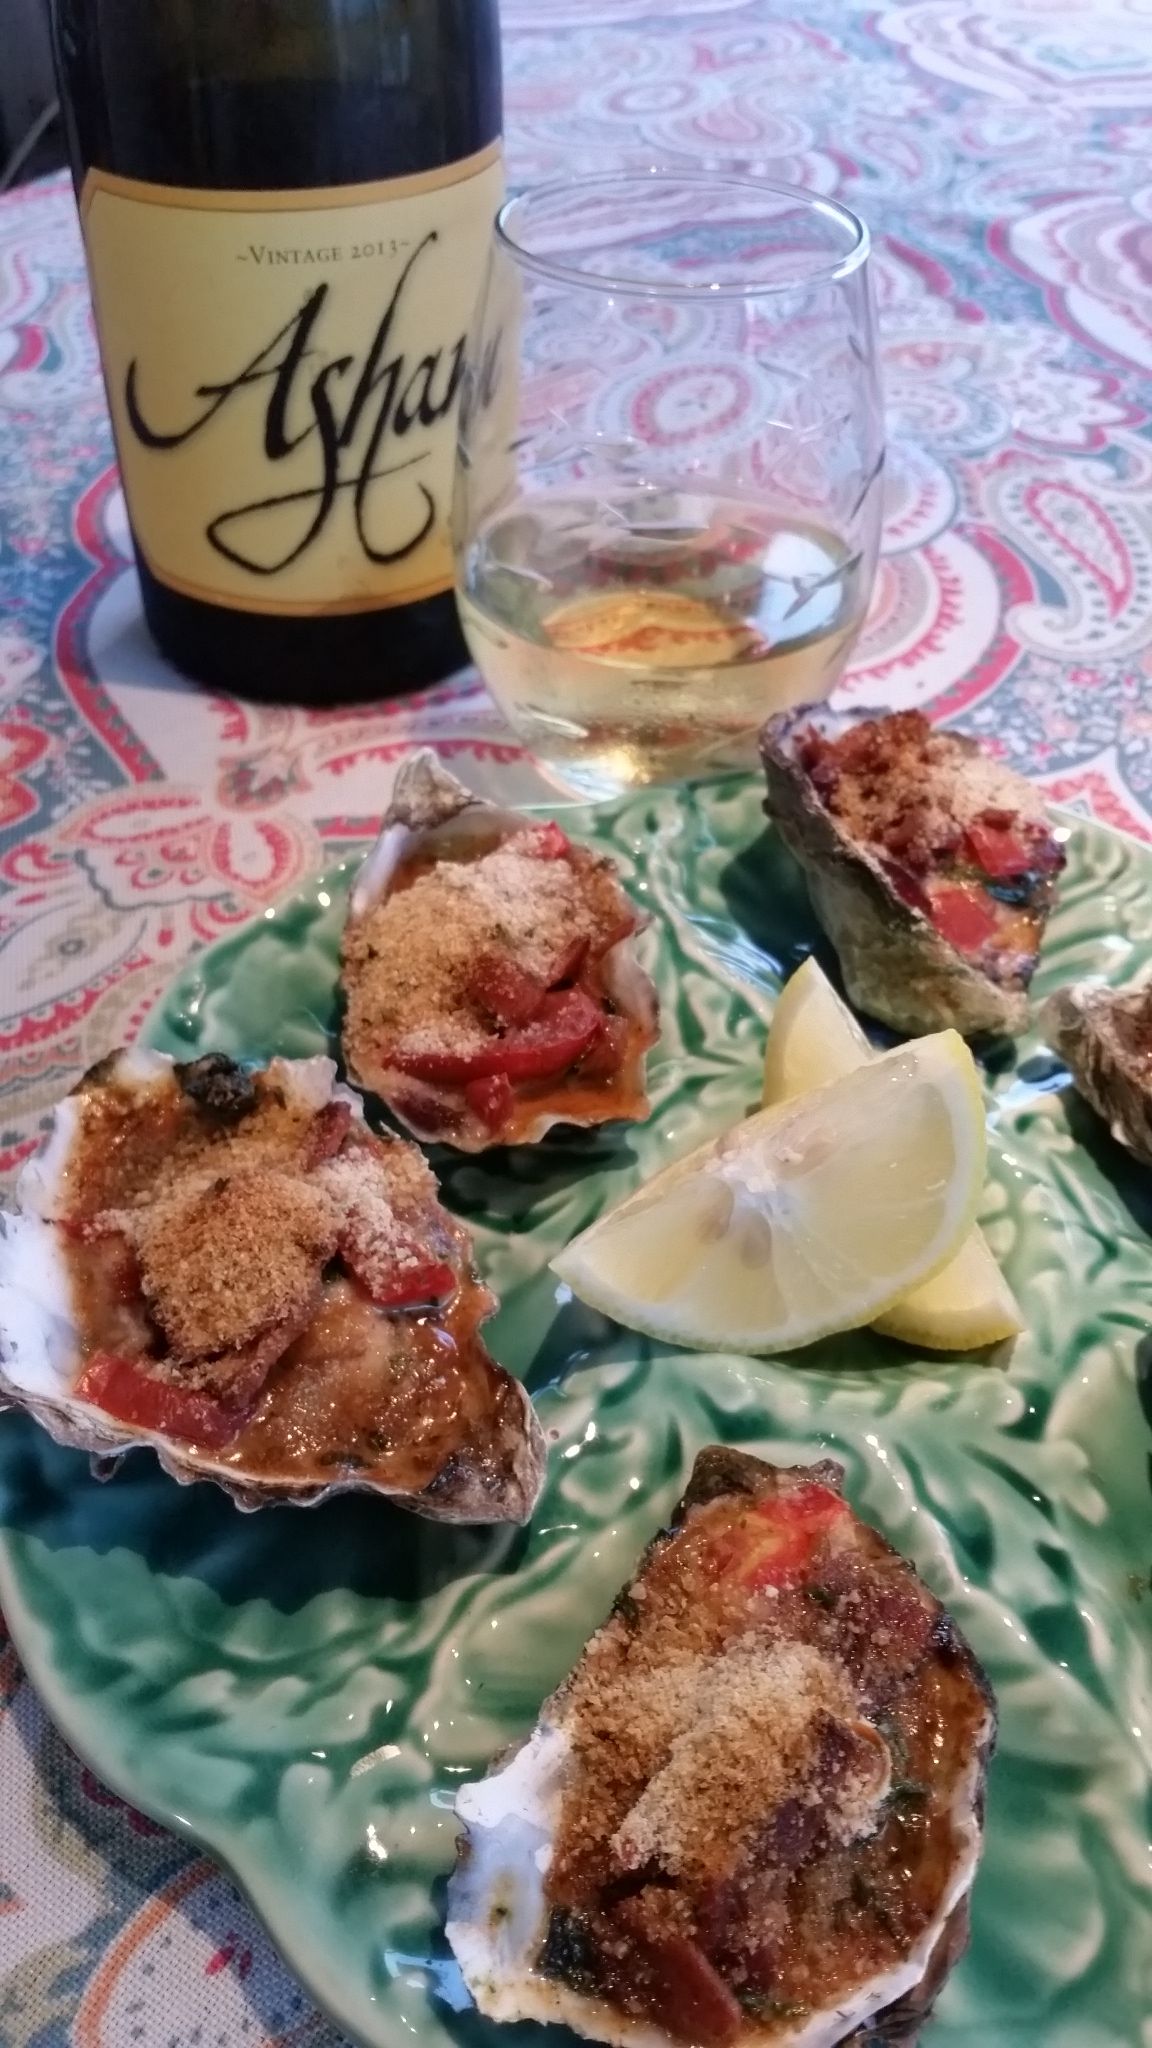 Vermouth Baked Oysters + Vintage Oyster Plates from France